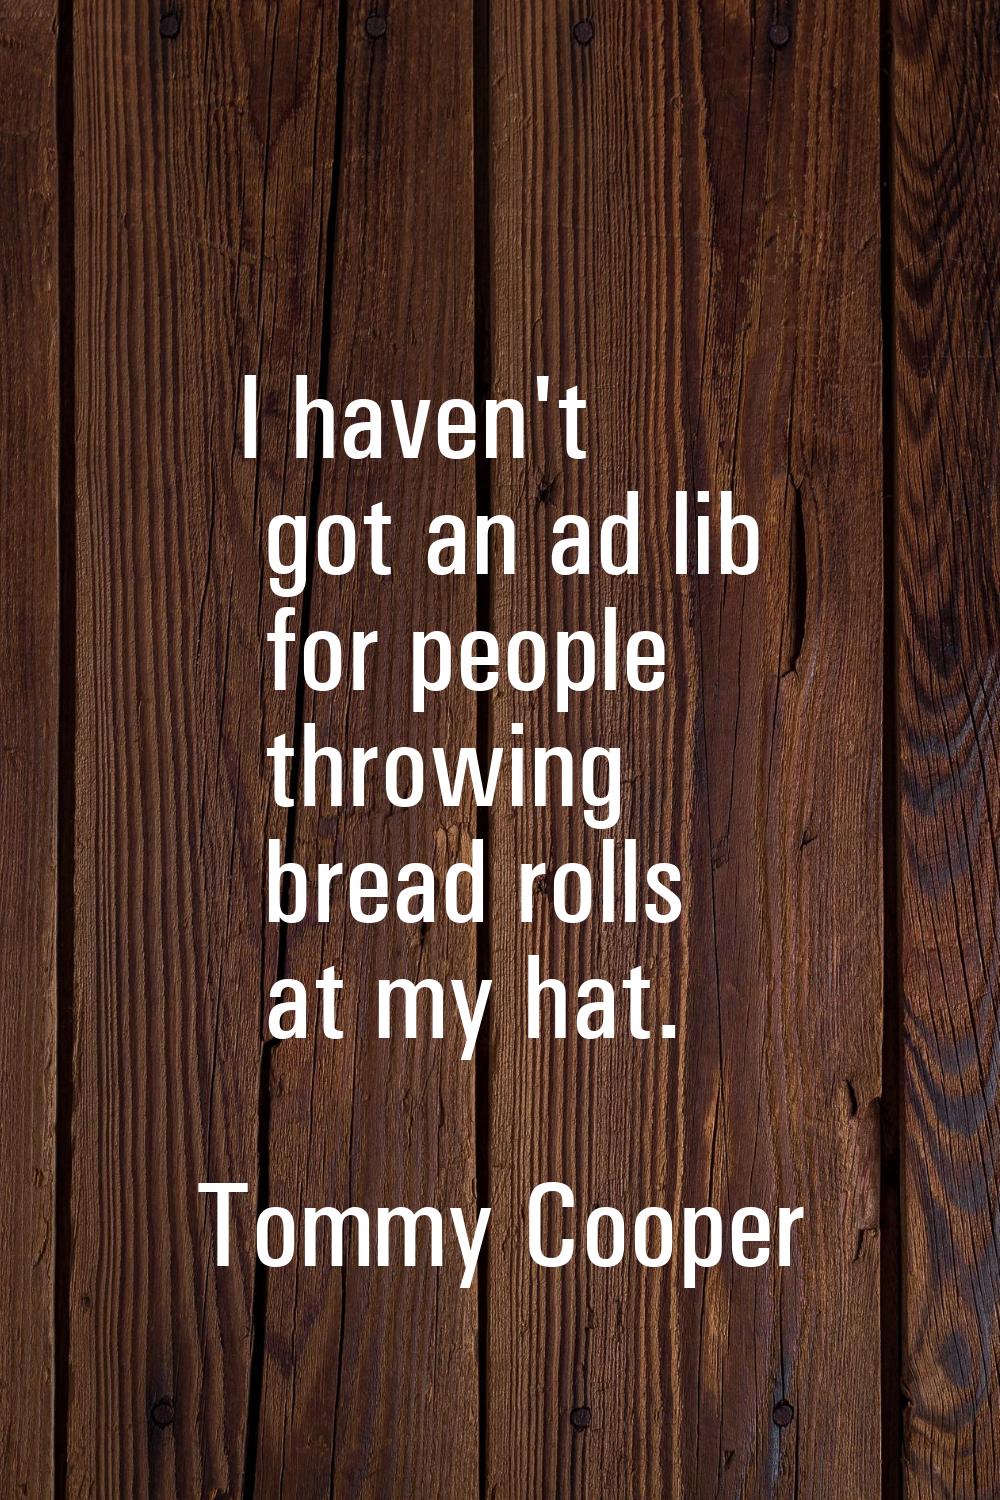 I haven't got an ad lib for people throwing bread rolls at my hat.